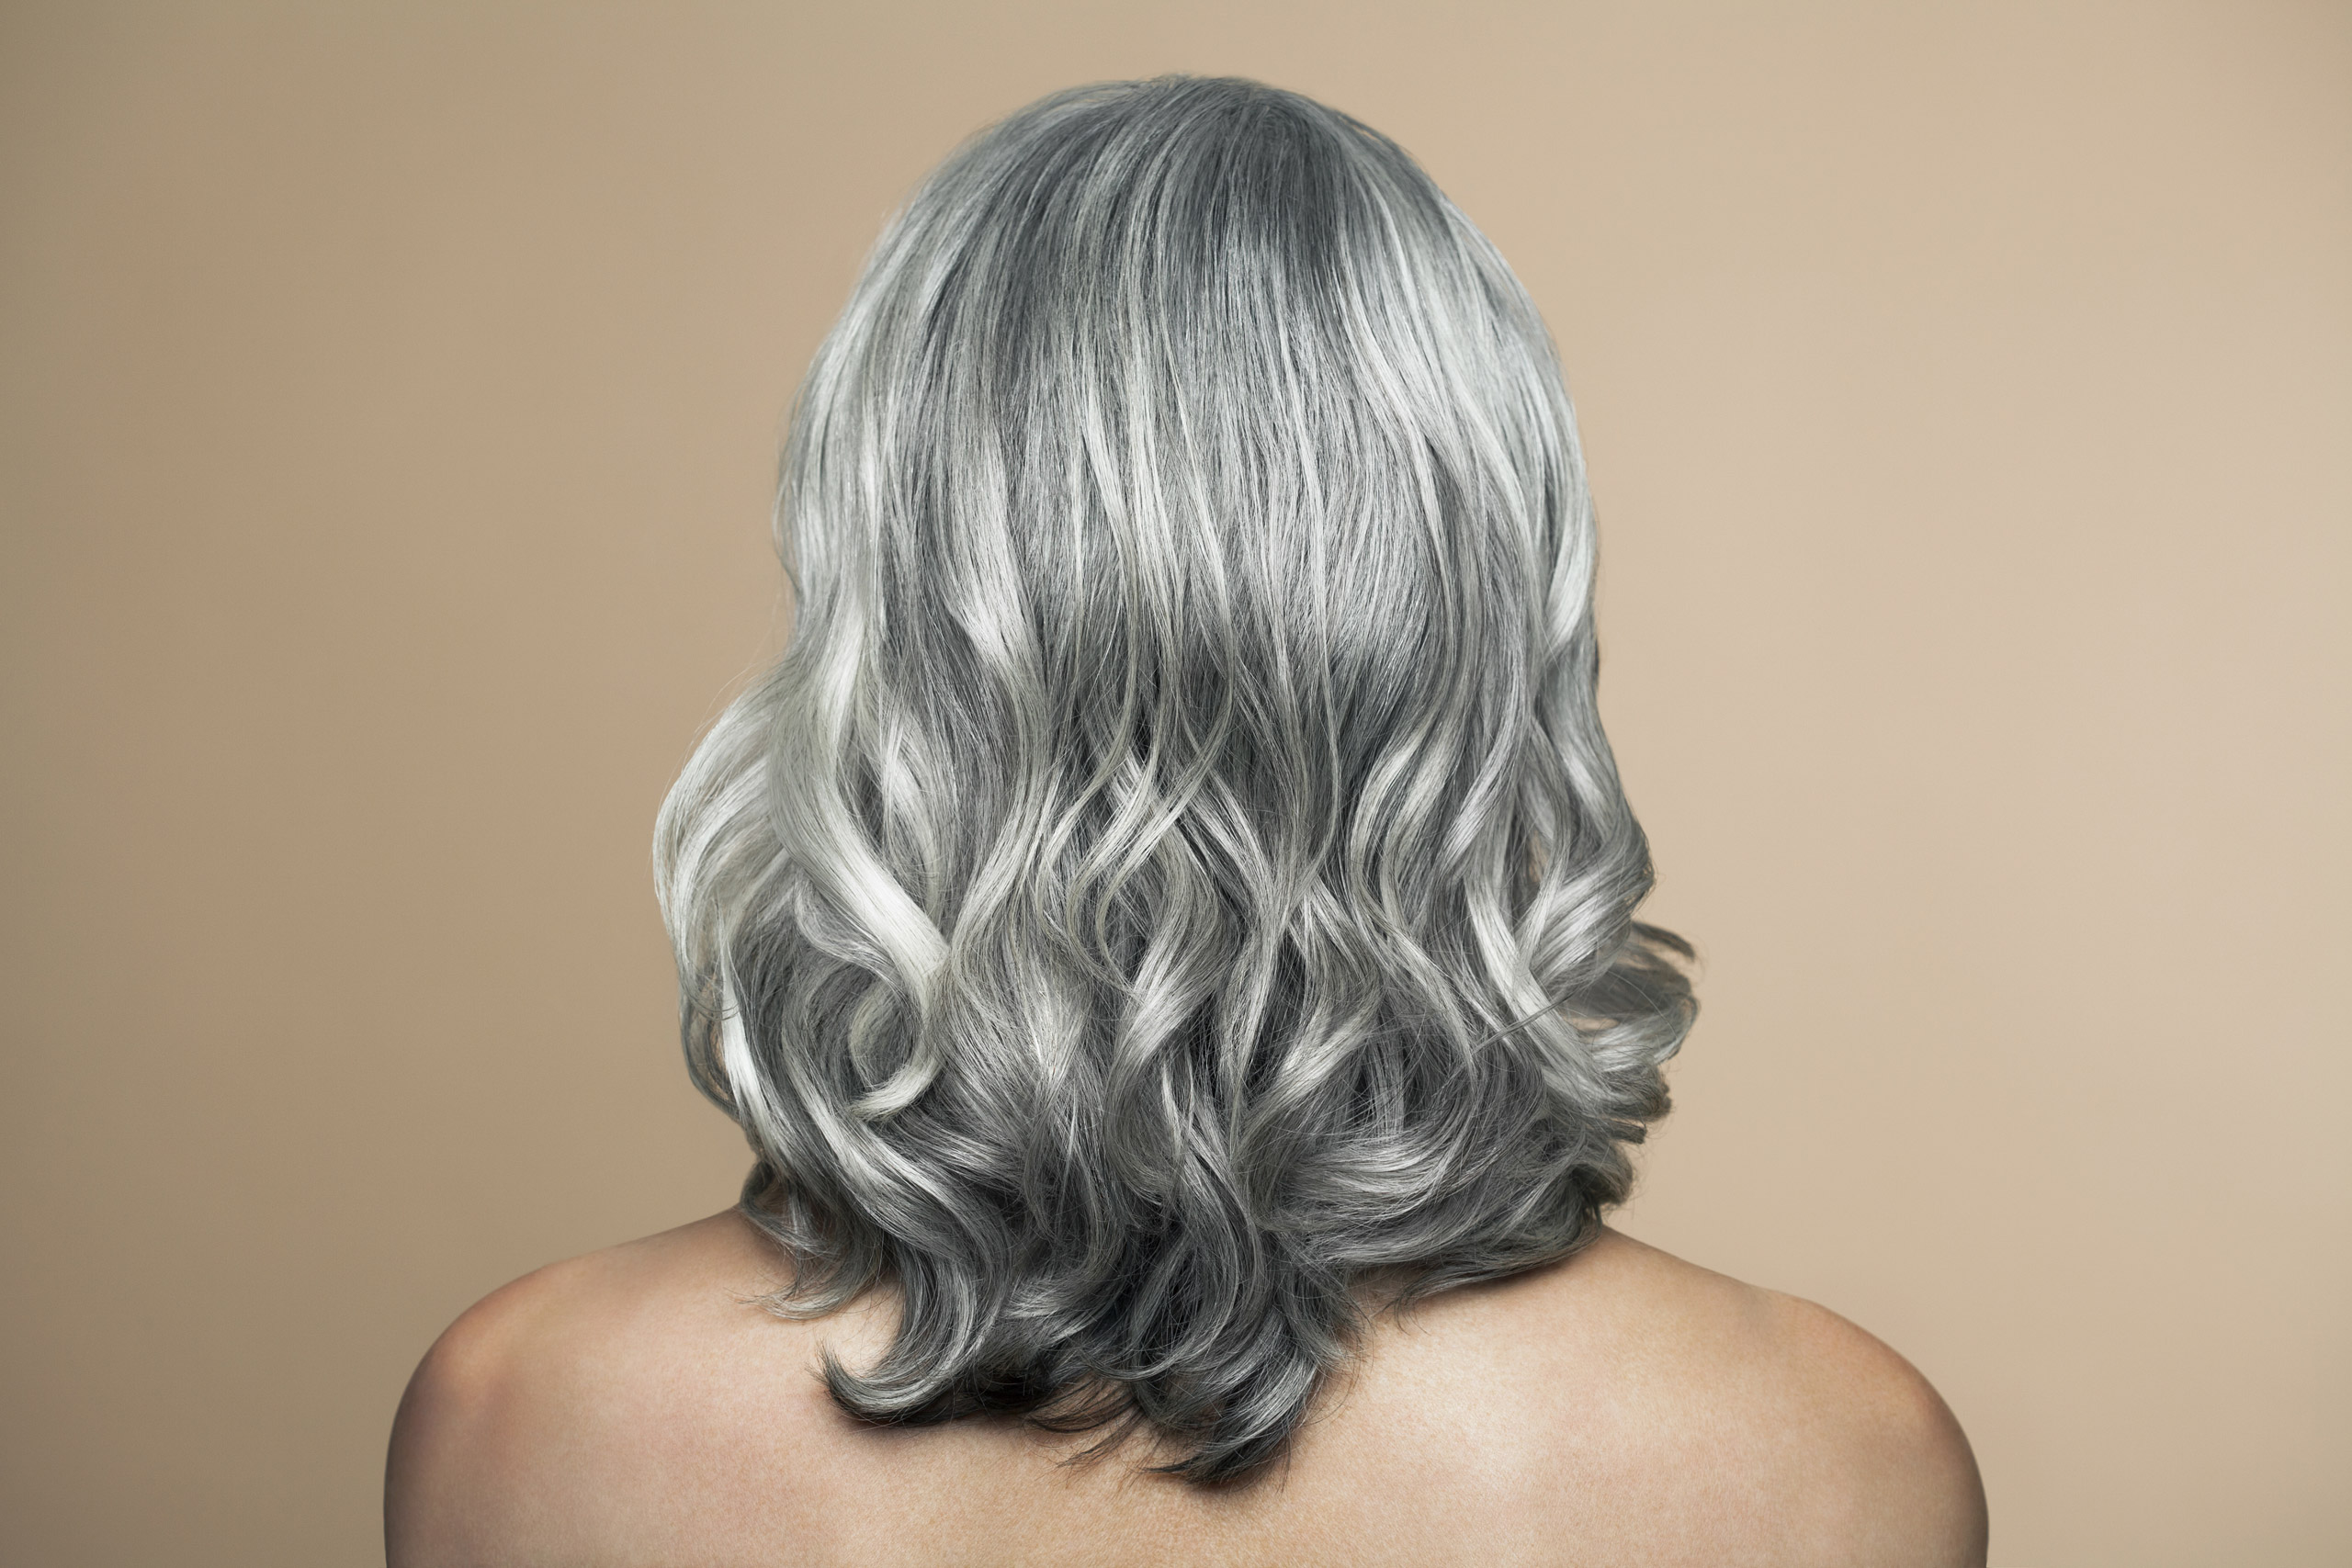 Nude mature woman with grey hair, back view.